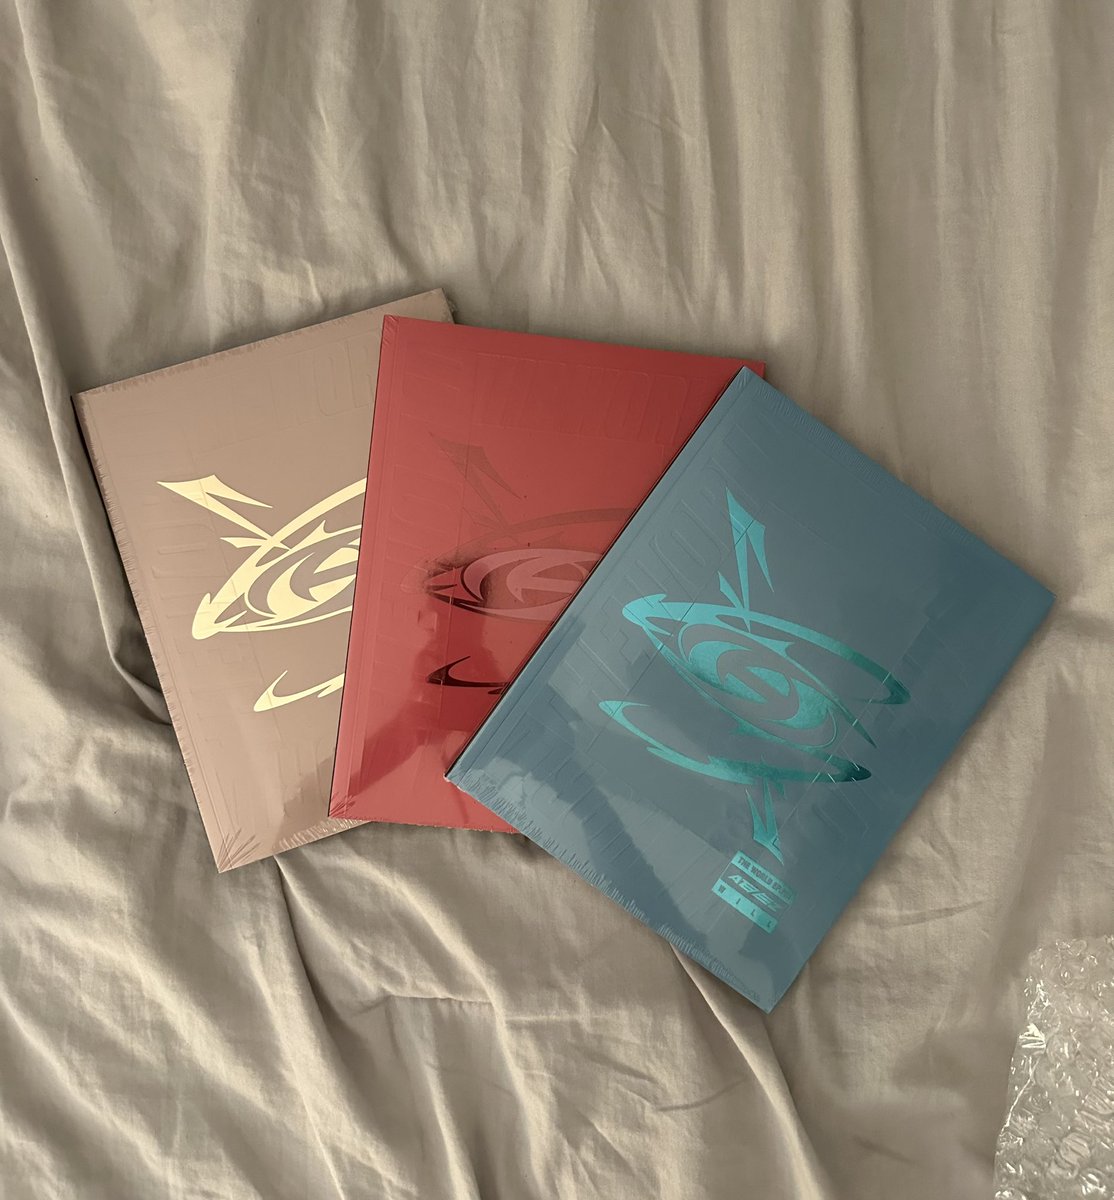 #wts / want to sell

Hey all I’m selling some Ateez sealed albums for $16 each free shipping! I have proofs on insta @/hwaawrld Please dm me if you’re interested 😊

#ateez #theworldepfin #wtsateez #ateezgo #hongjoong #seonghwa #yunho #yeosang #san #mingi #wooyoung #jongho